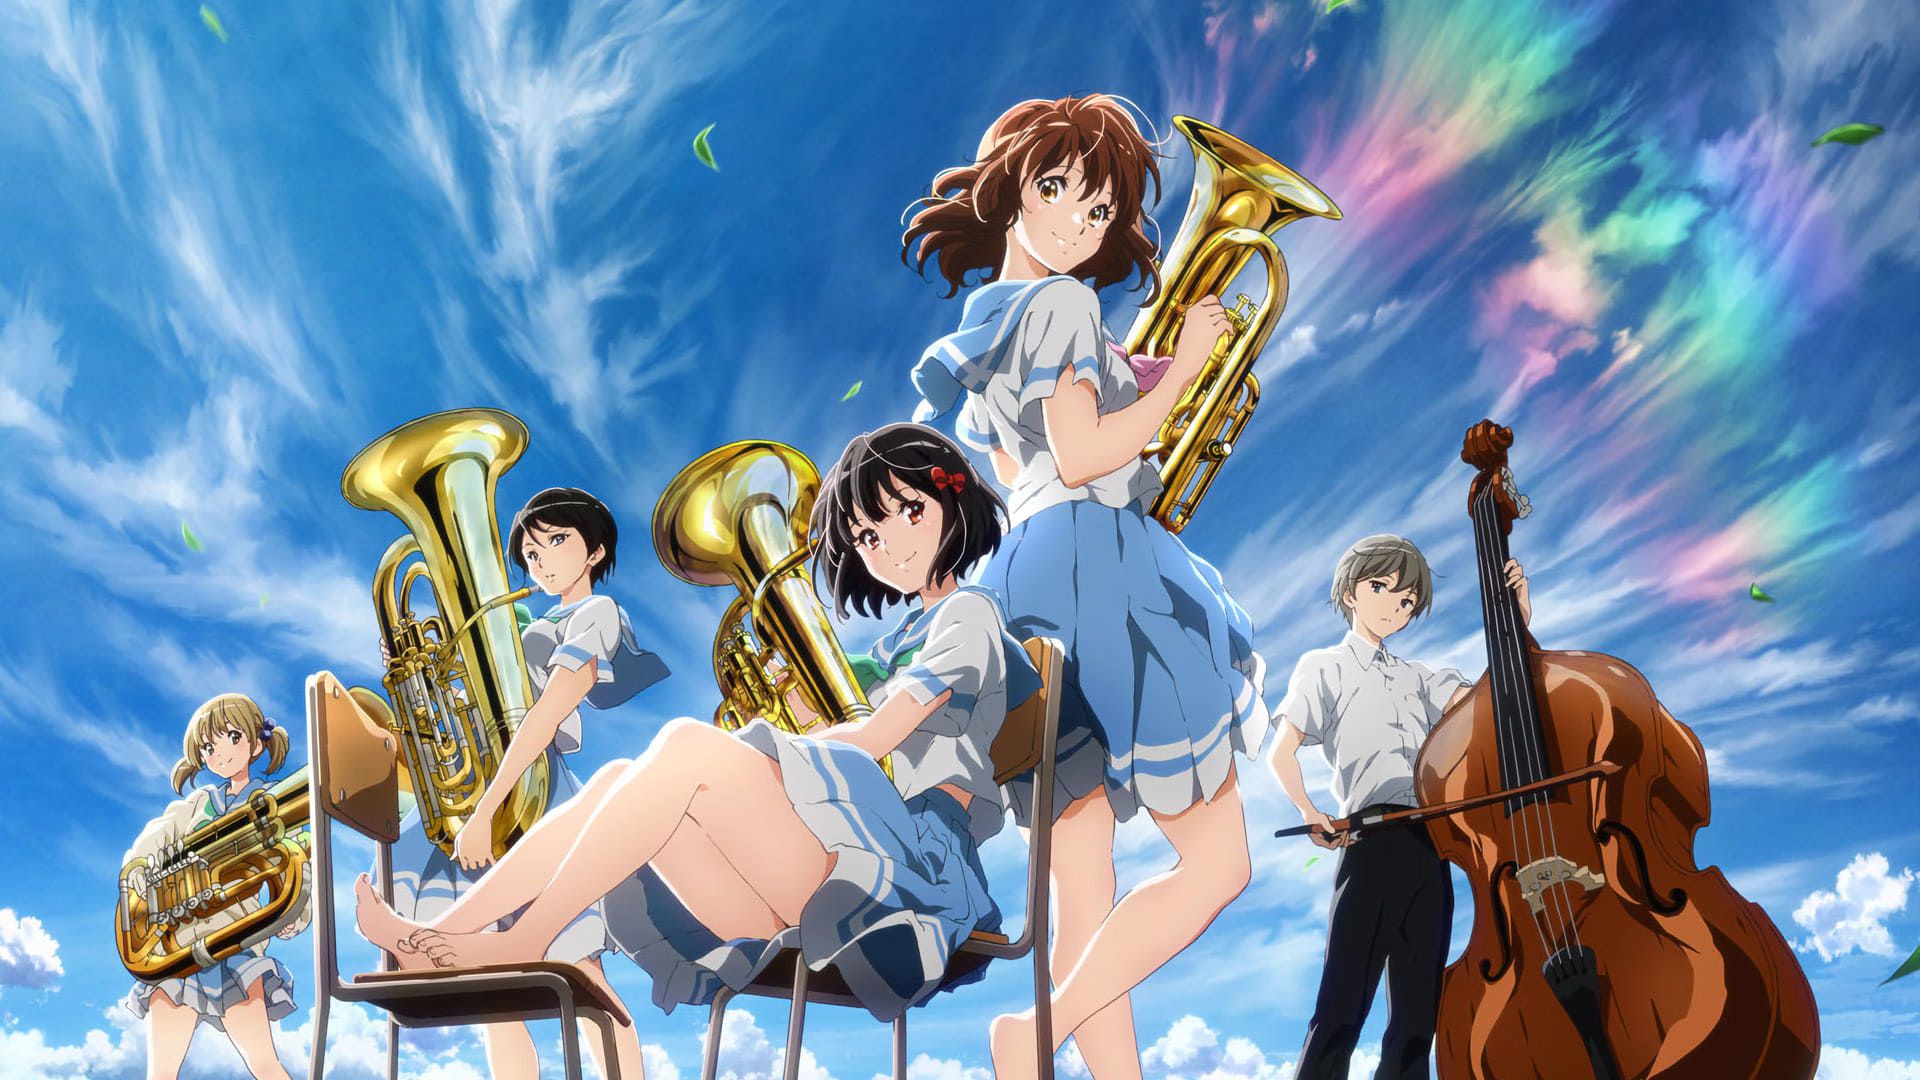 Cubierta de Sound! Euphonium The Movie – Our Promise: A Brand New Day